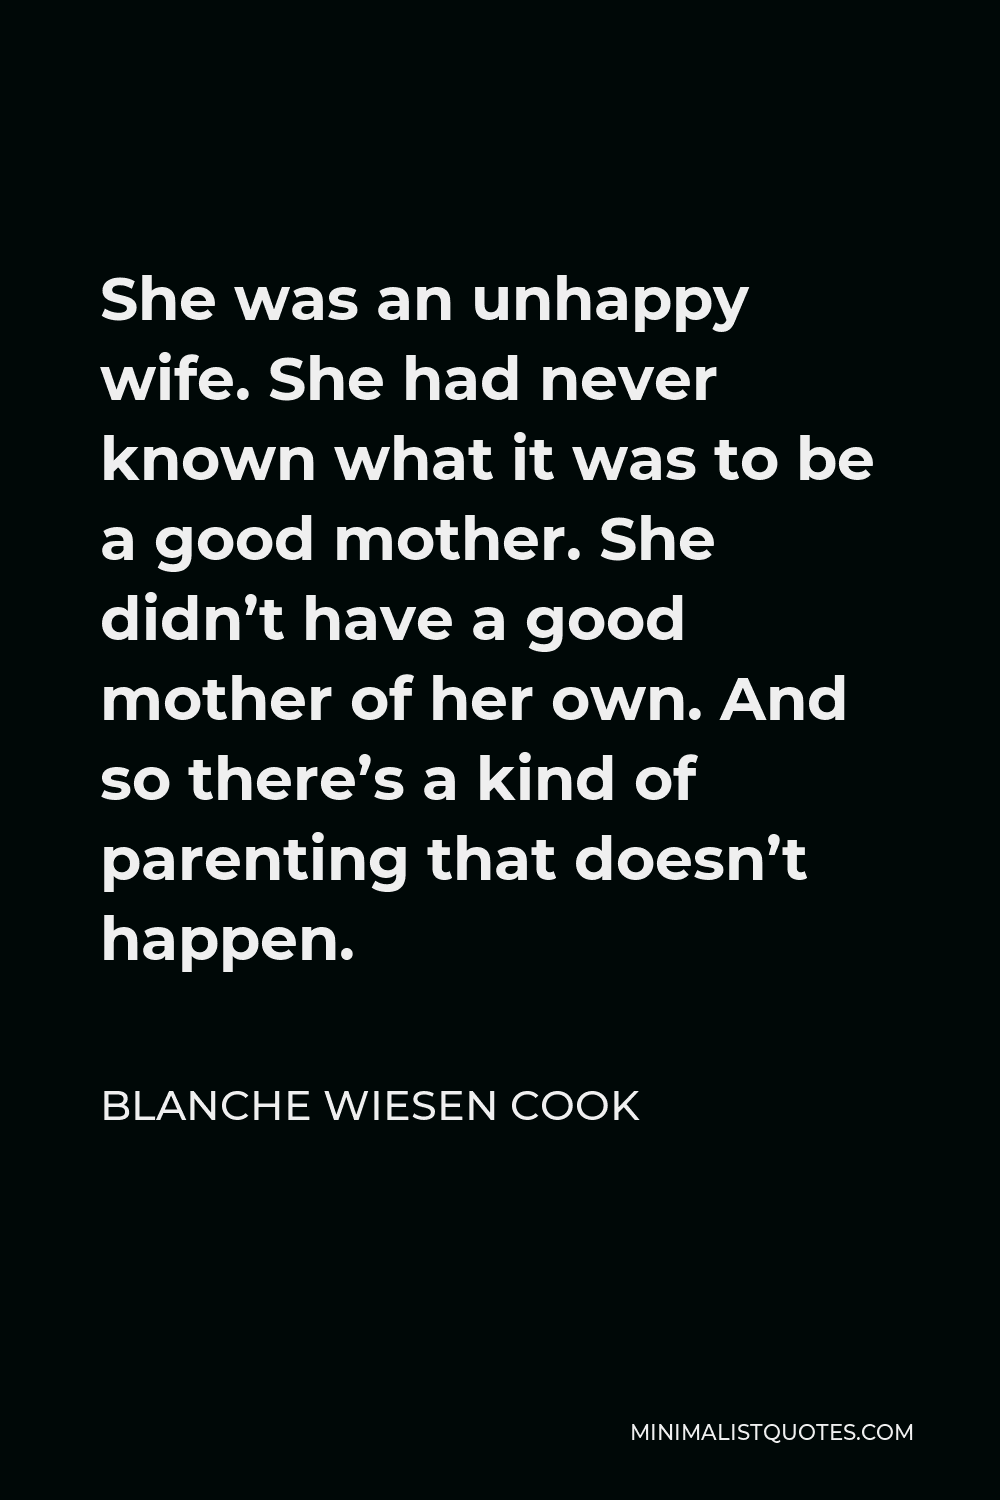 Blanche Wiesen Cook Quote - She was an unhappy wife. She had never known what it was to be a good mother. She didn’t have a good mother of her own. And so there’s a kind of parenting that doesn’t happen.